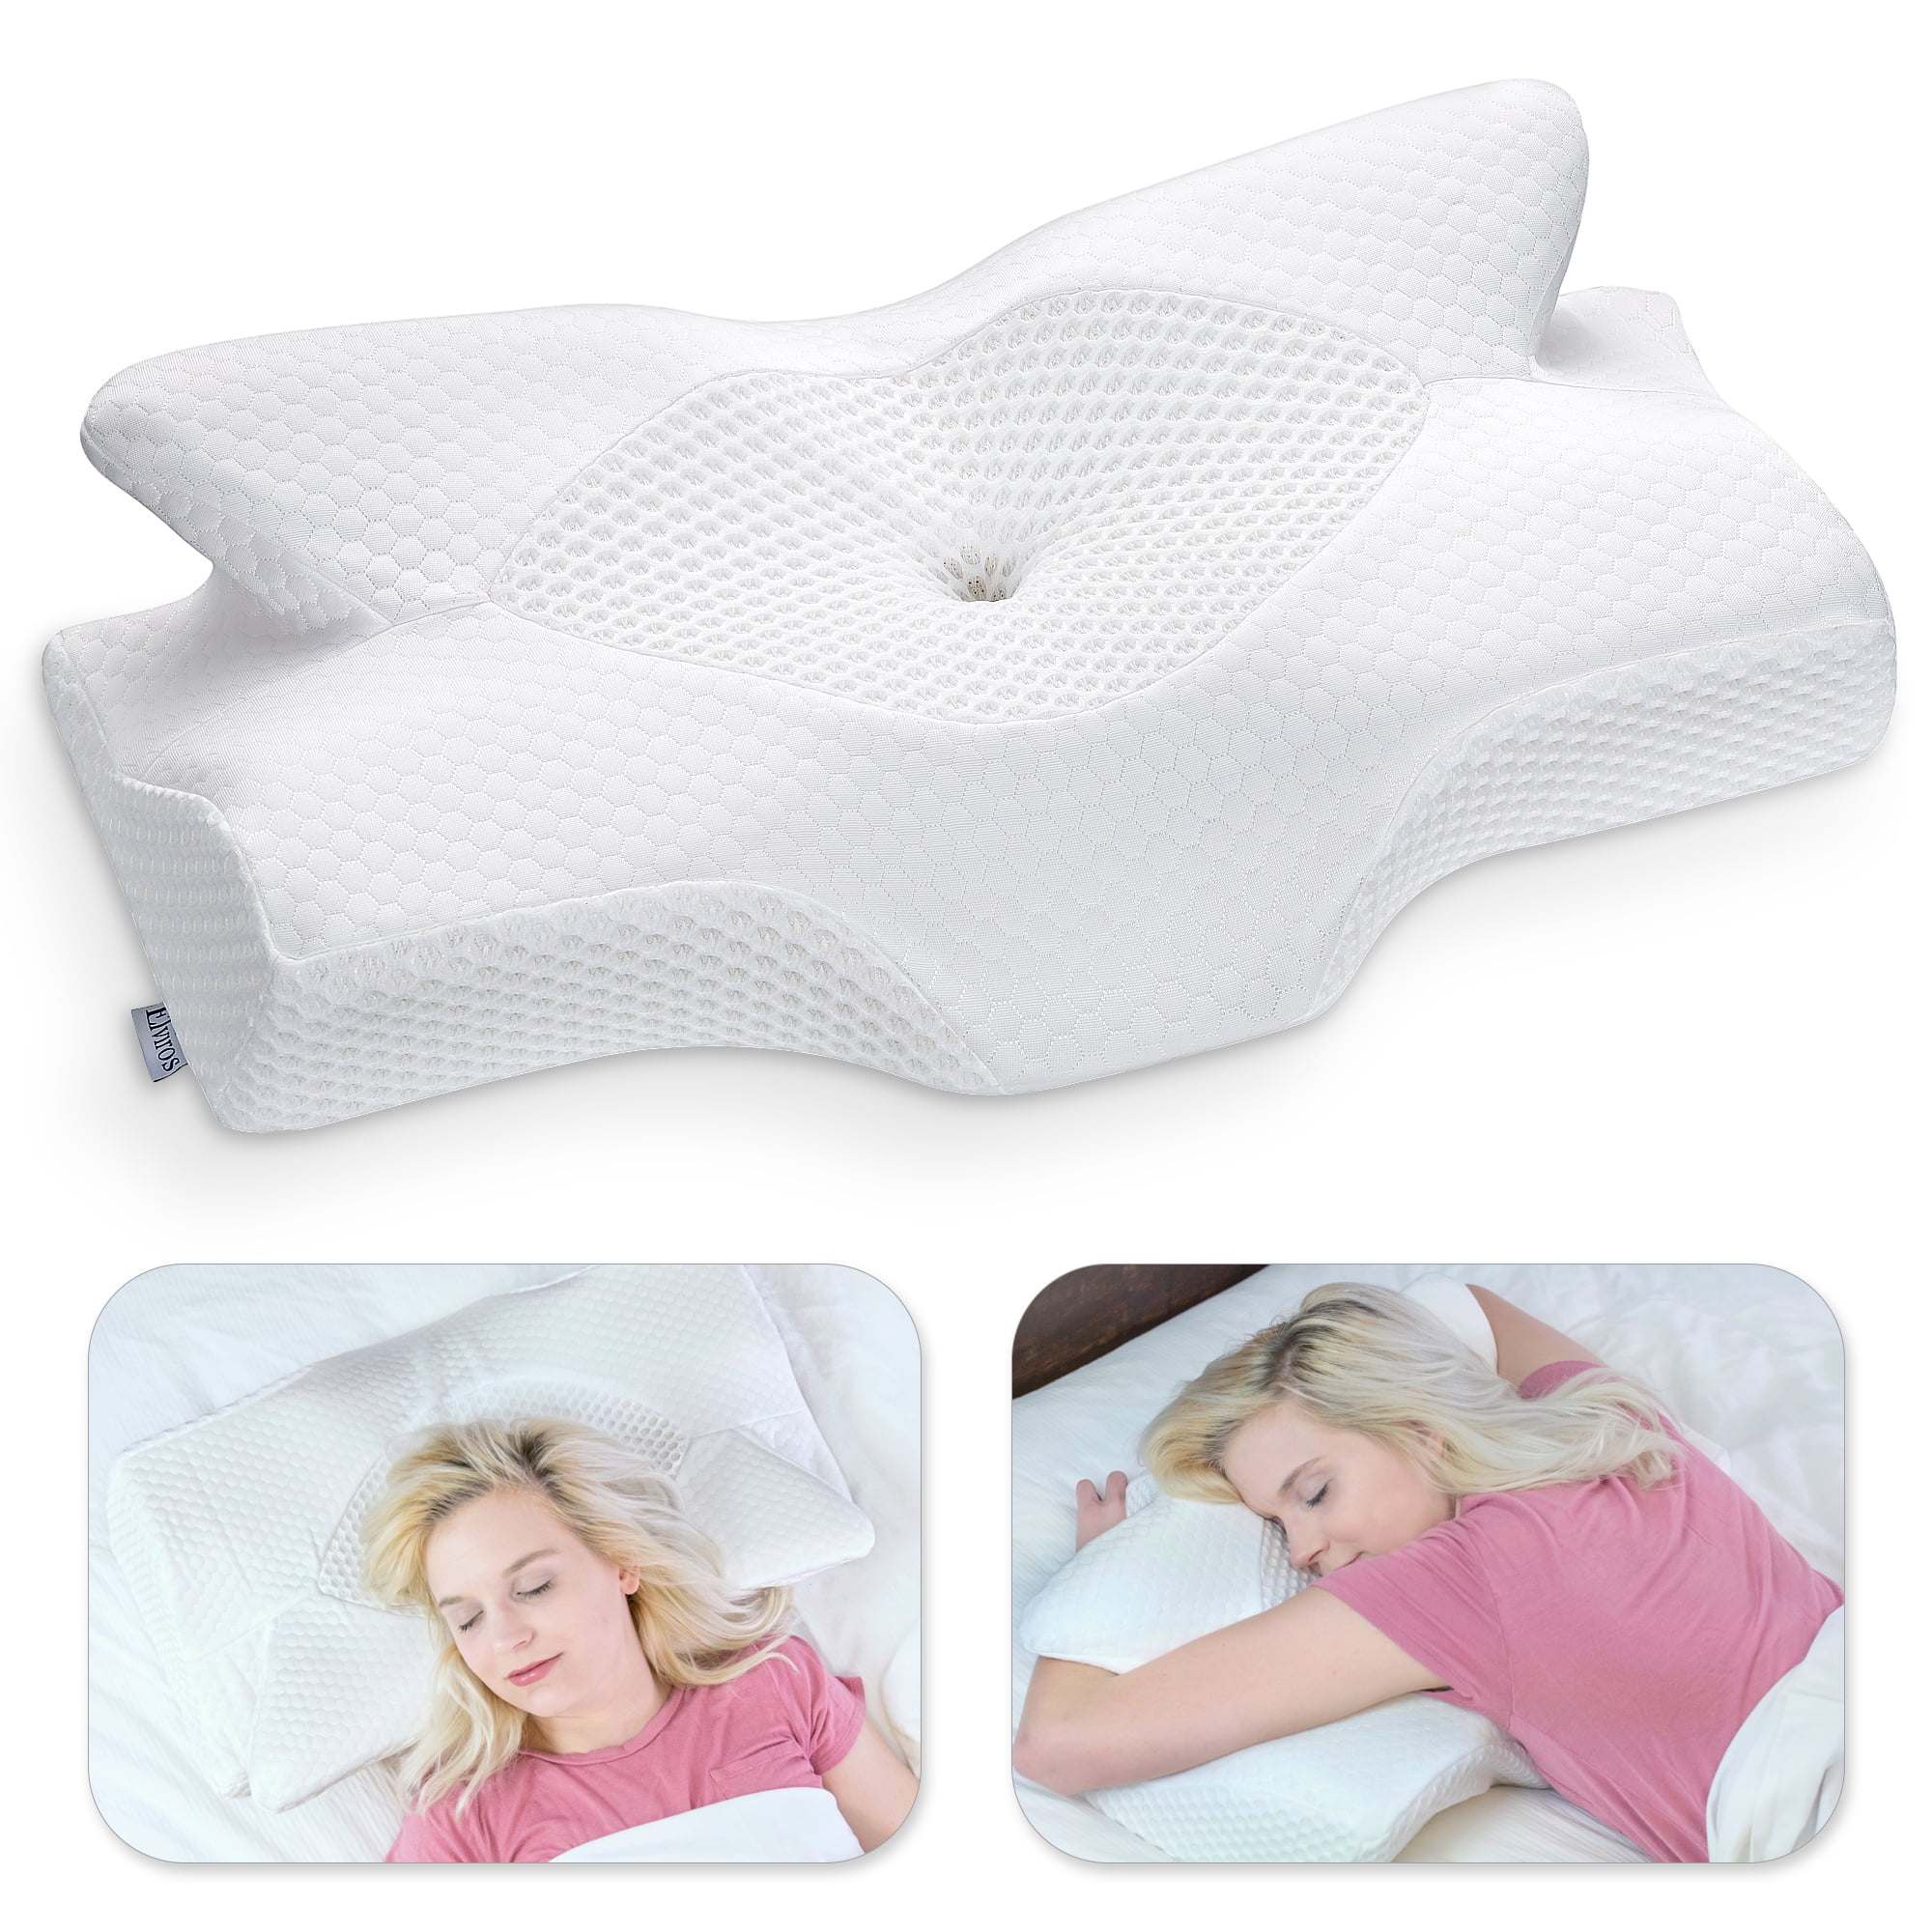 Back and Stomach Sleepers Replace Pillowcase Memory Foam Pillow Cervical Pillow Contour Pillow for Neck and Shoulder Pain Ergonomic Orthopedic Sleeping Neck Contoured Support Pillow for Side Sleepers